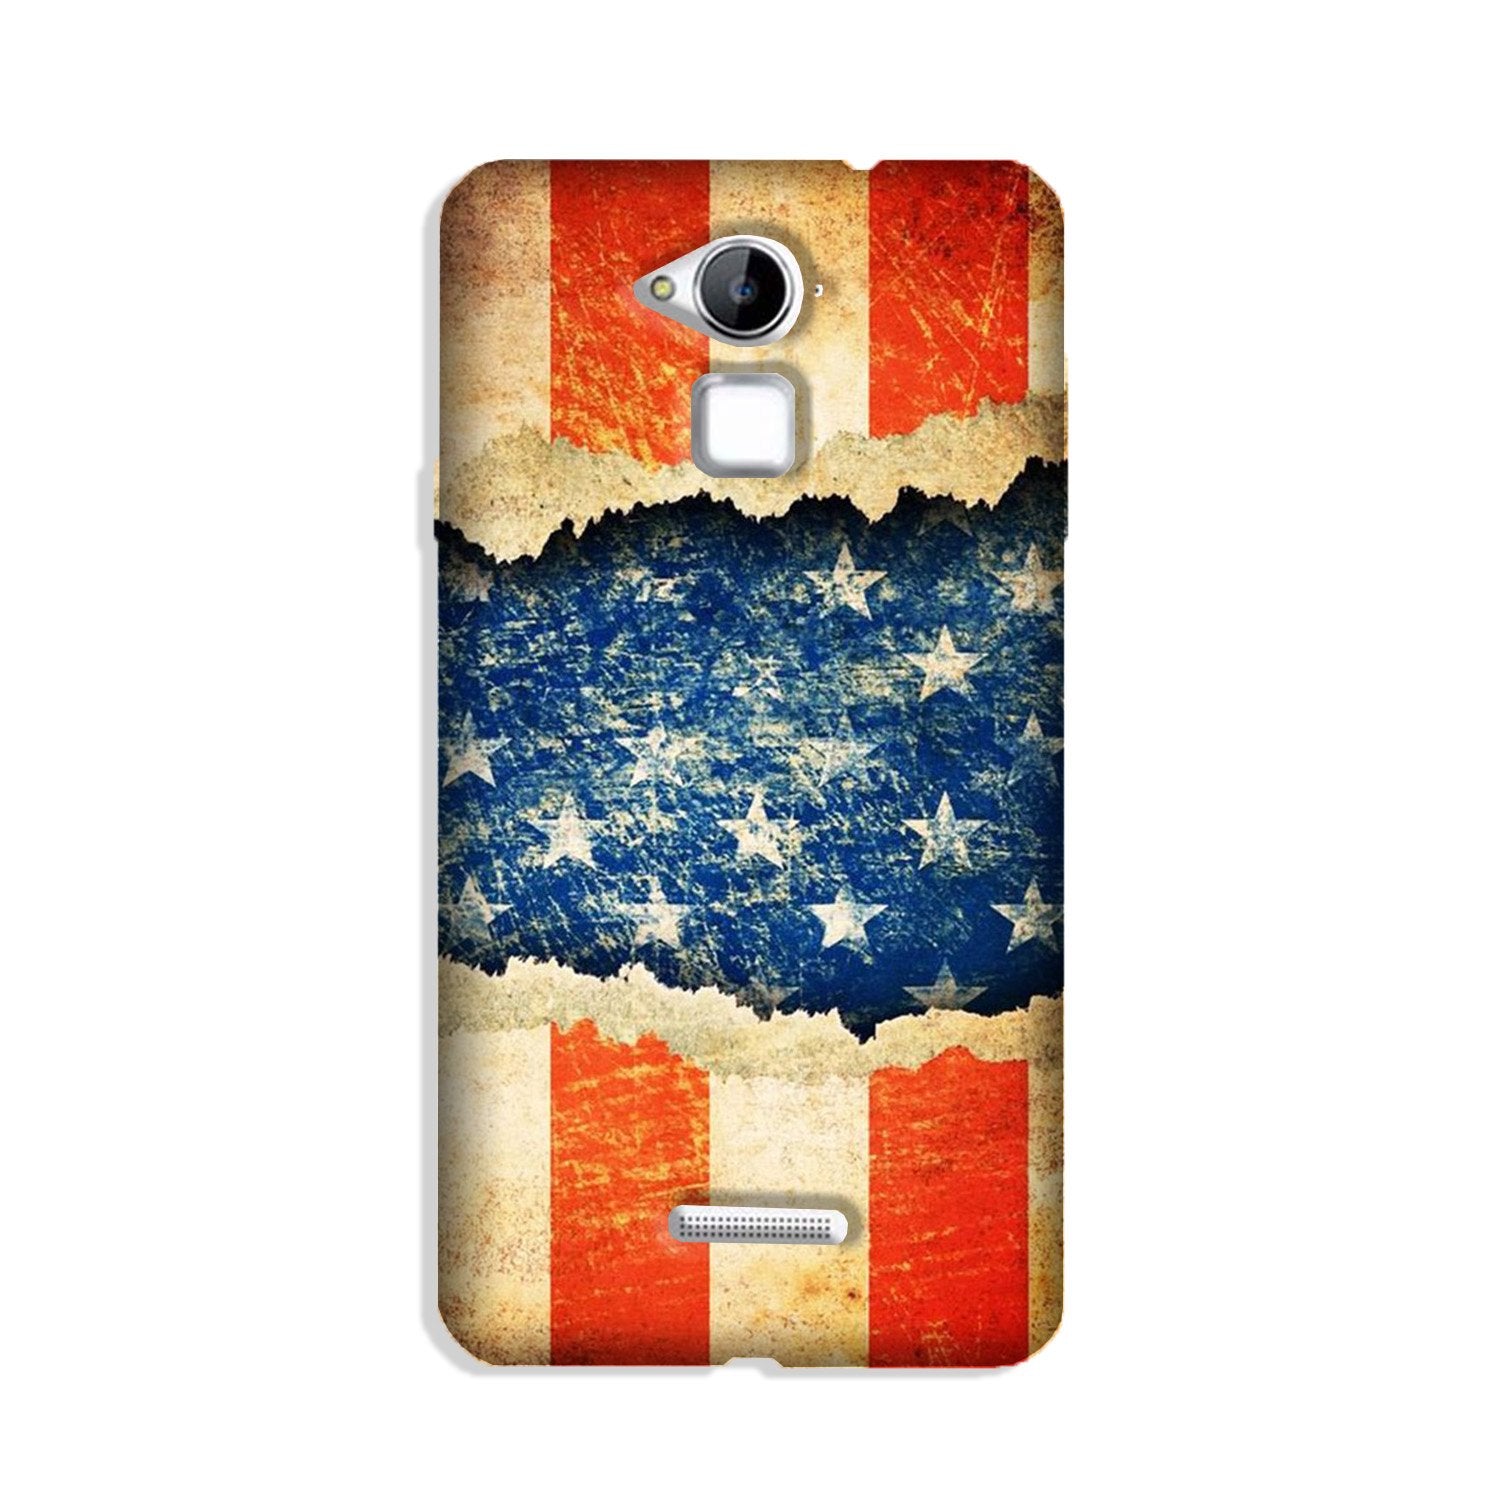 United Kingdom Case for Coolpad Note 3